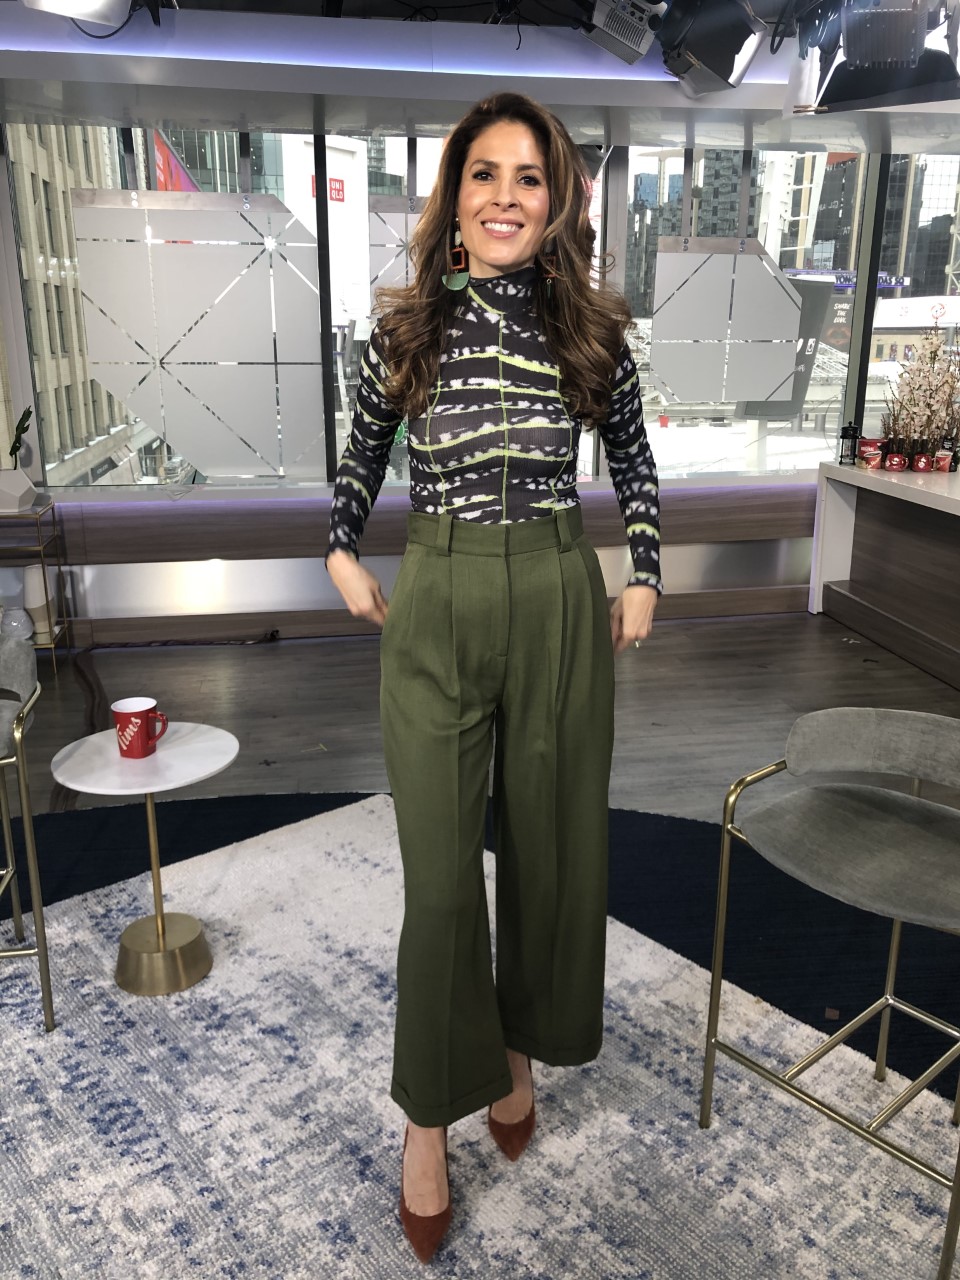 Dina wearing army green wide leg trousers with black and white top